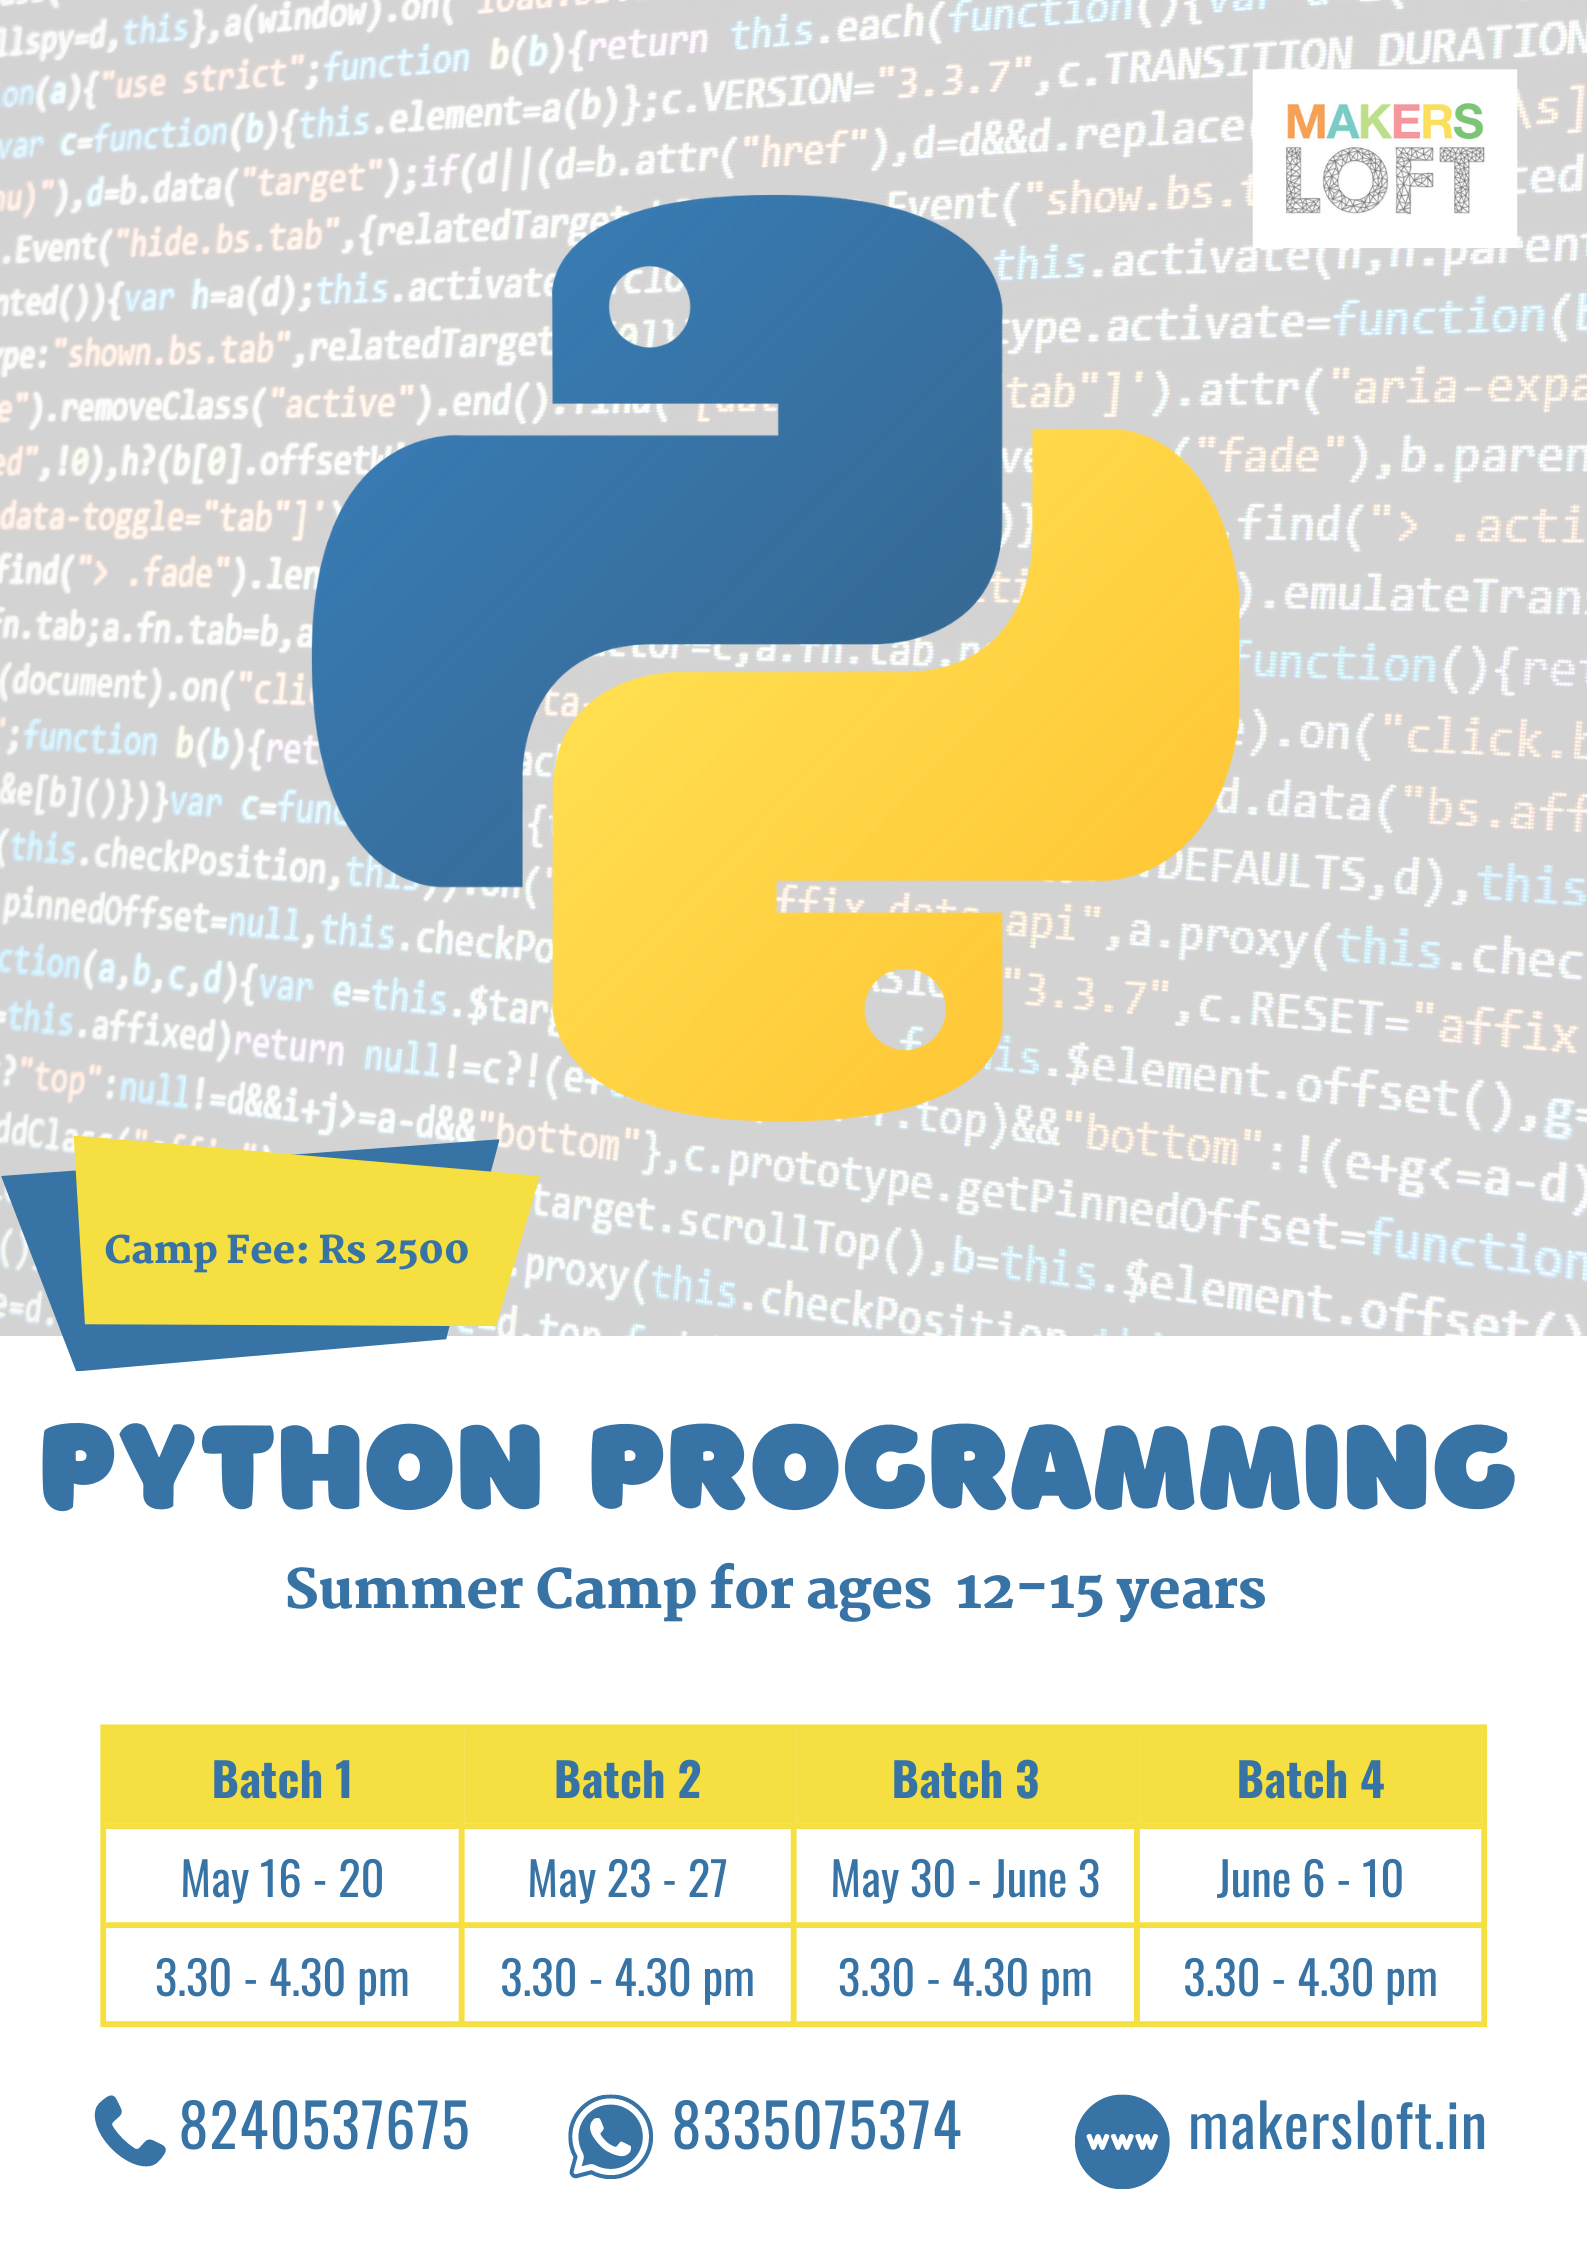 Python Programming Course for school students